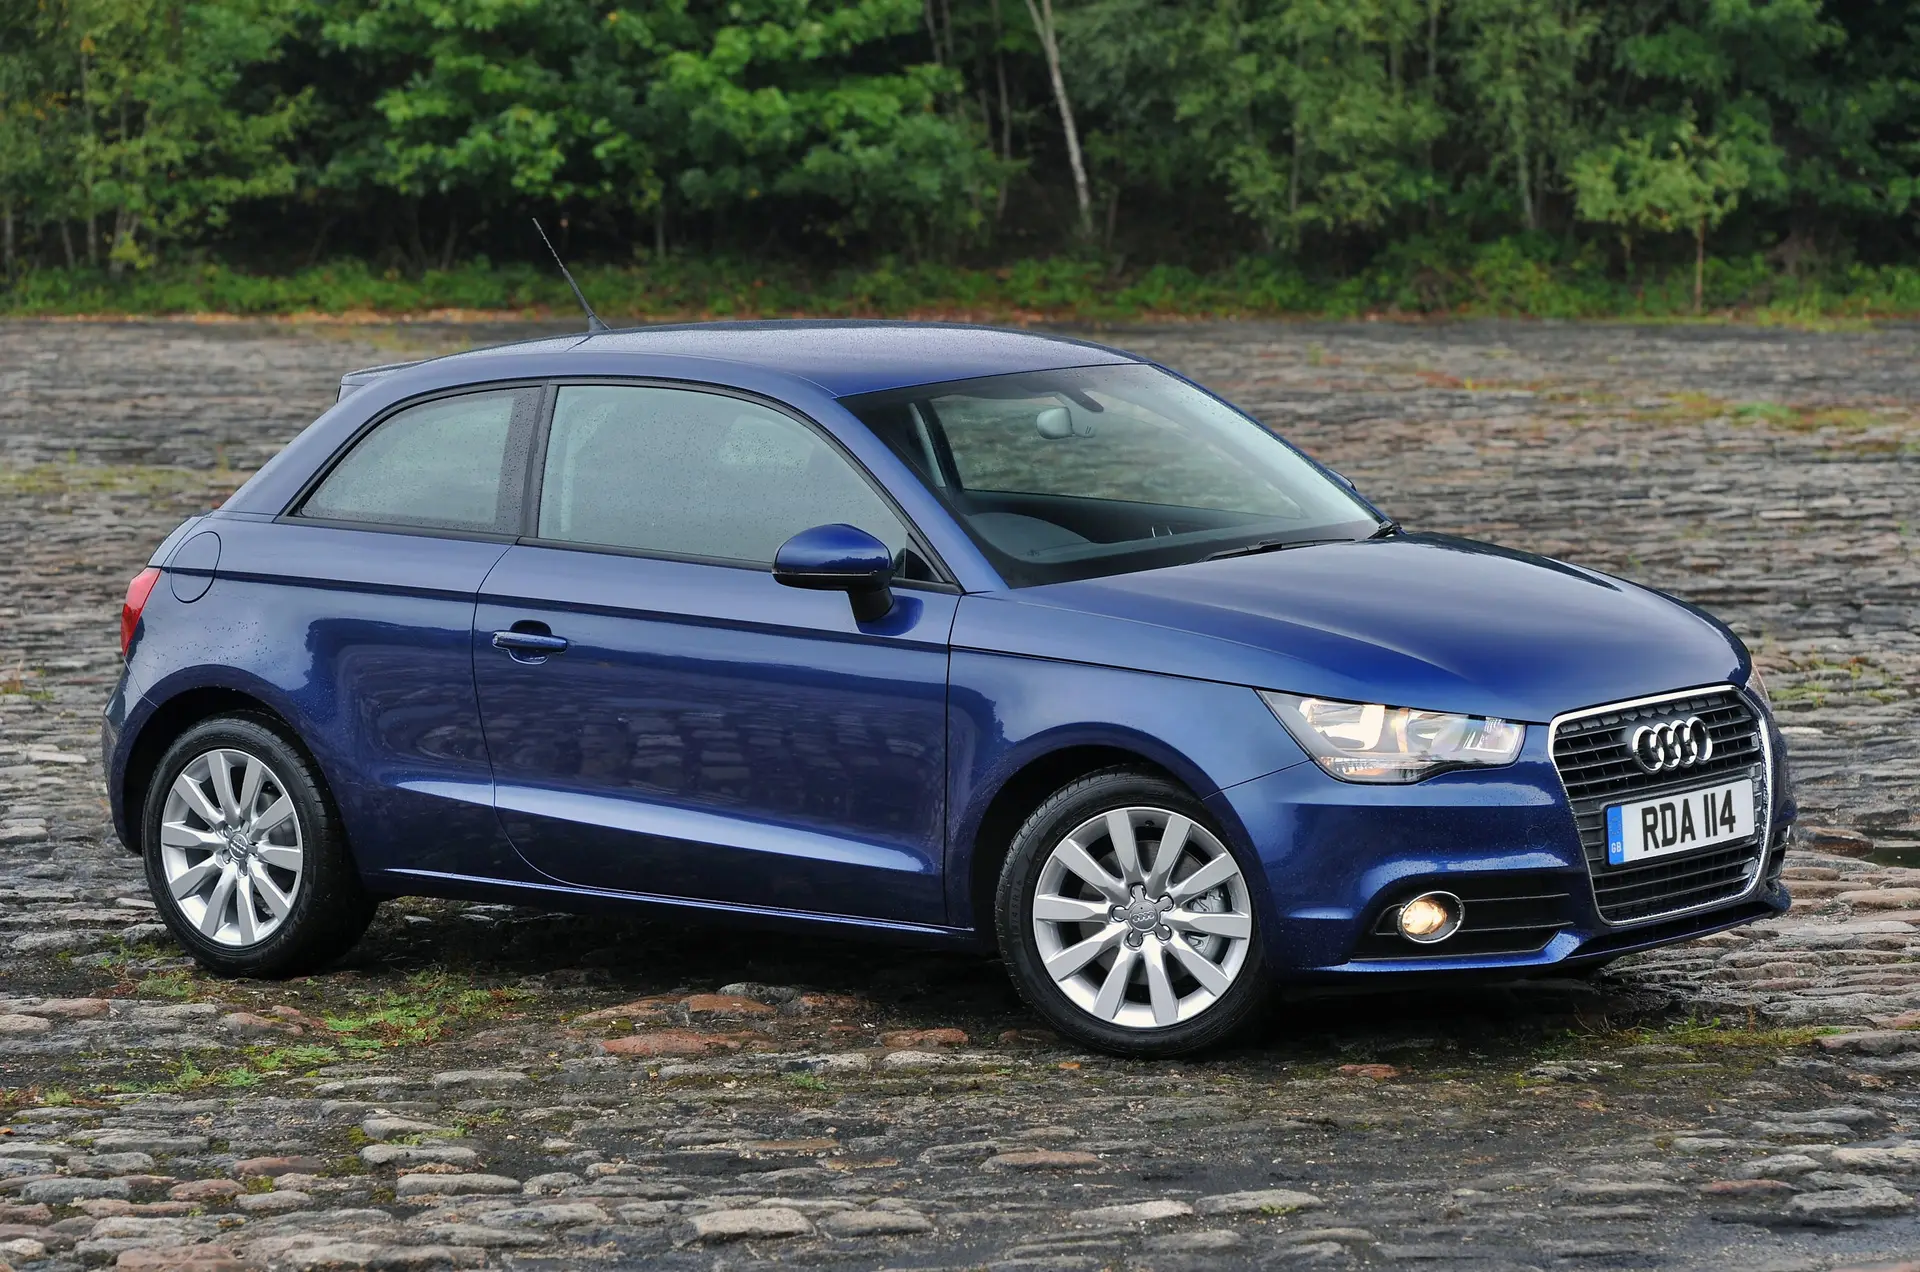 Audi A1 (2010-2018) Review: exterior front three quarter photo of the Audi A1